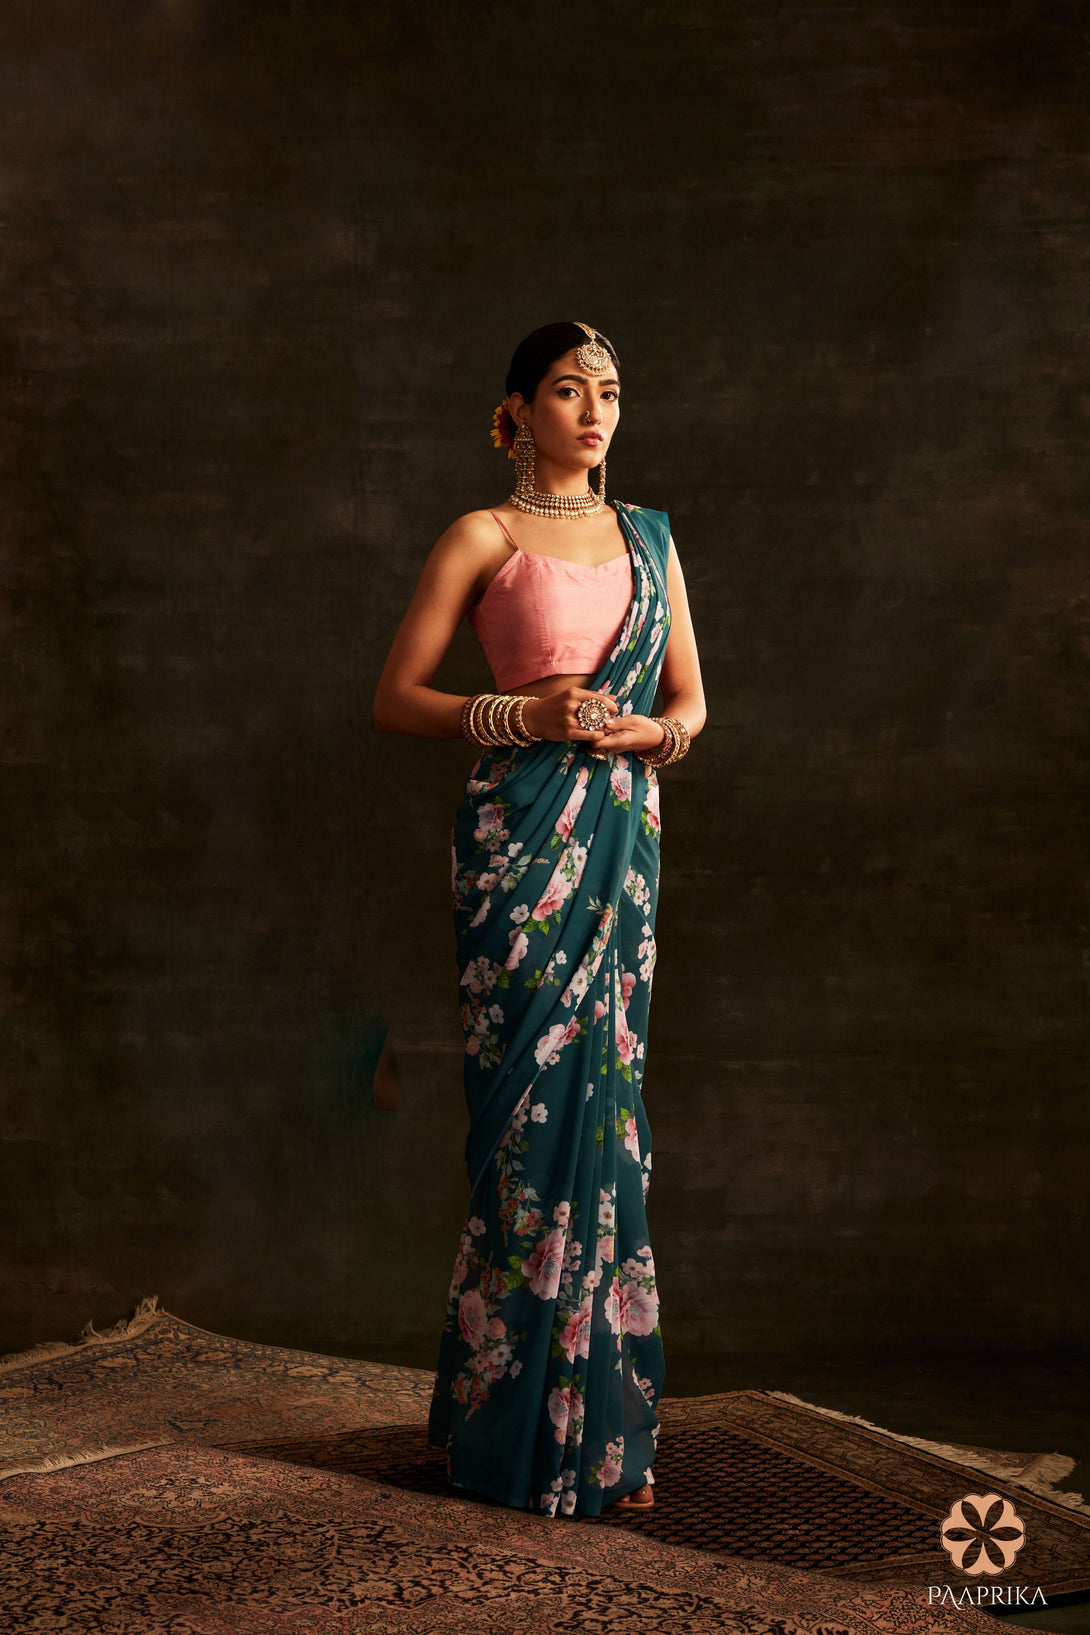 Exquisite Teal Green Floral Printed Georgette Saree, a stunning choice adorned with graceful blooms in serene hues.